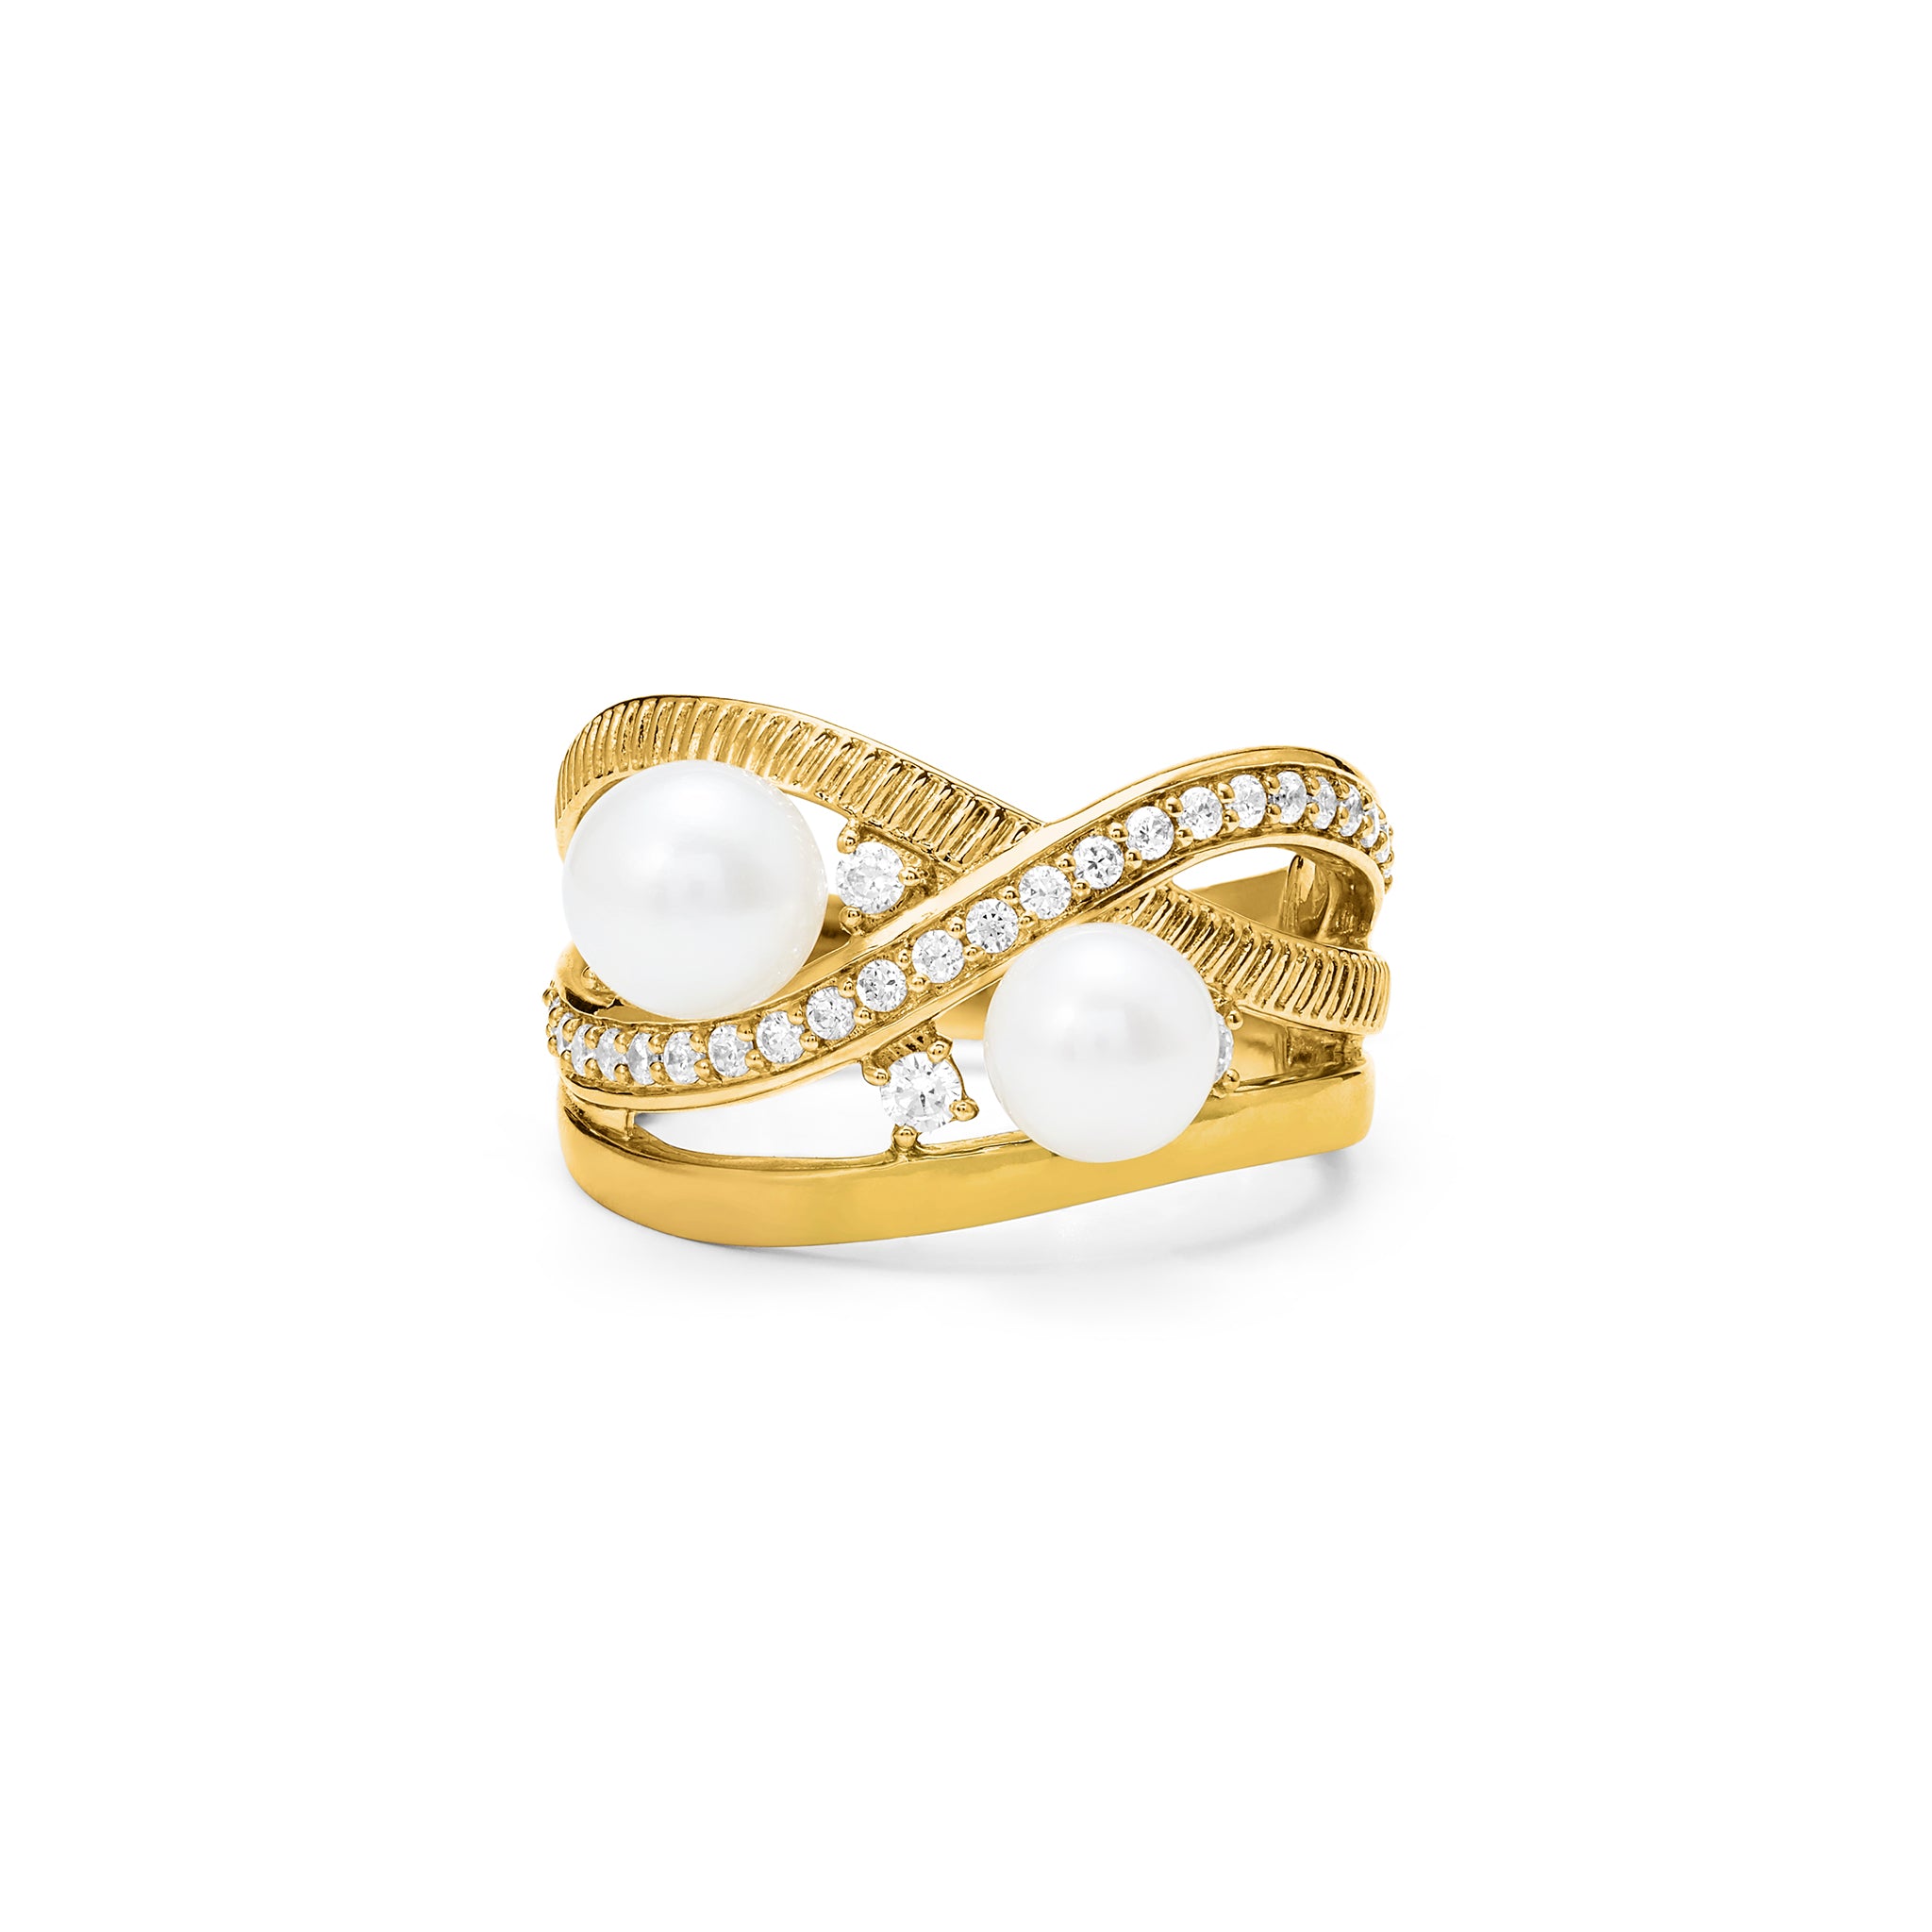 Shima Band Ring With Freshwater Pearls And Diamonds In 18K